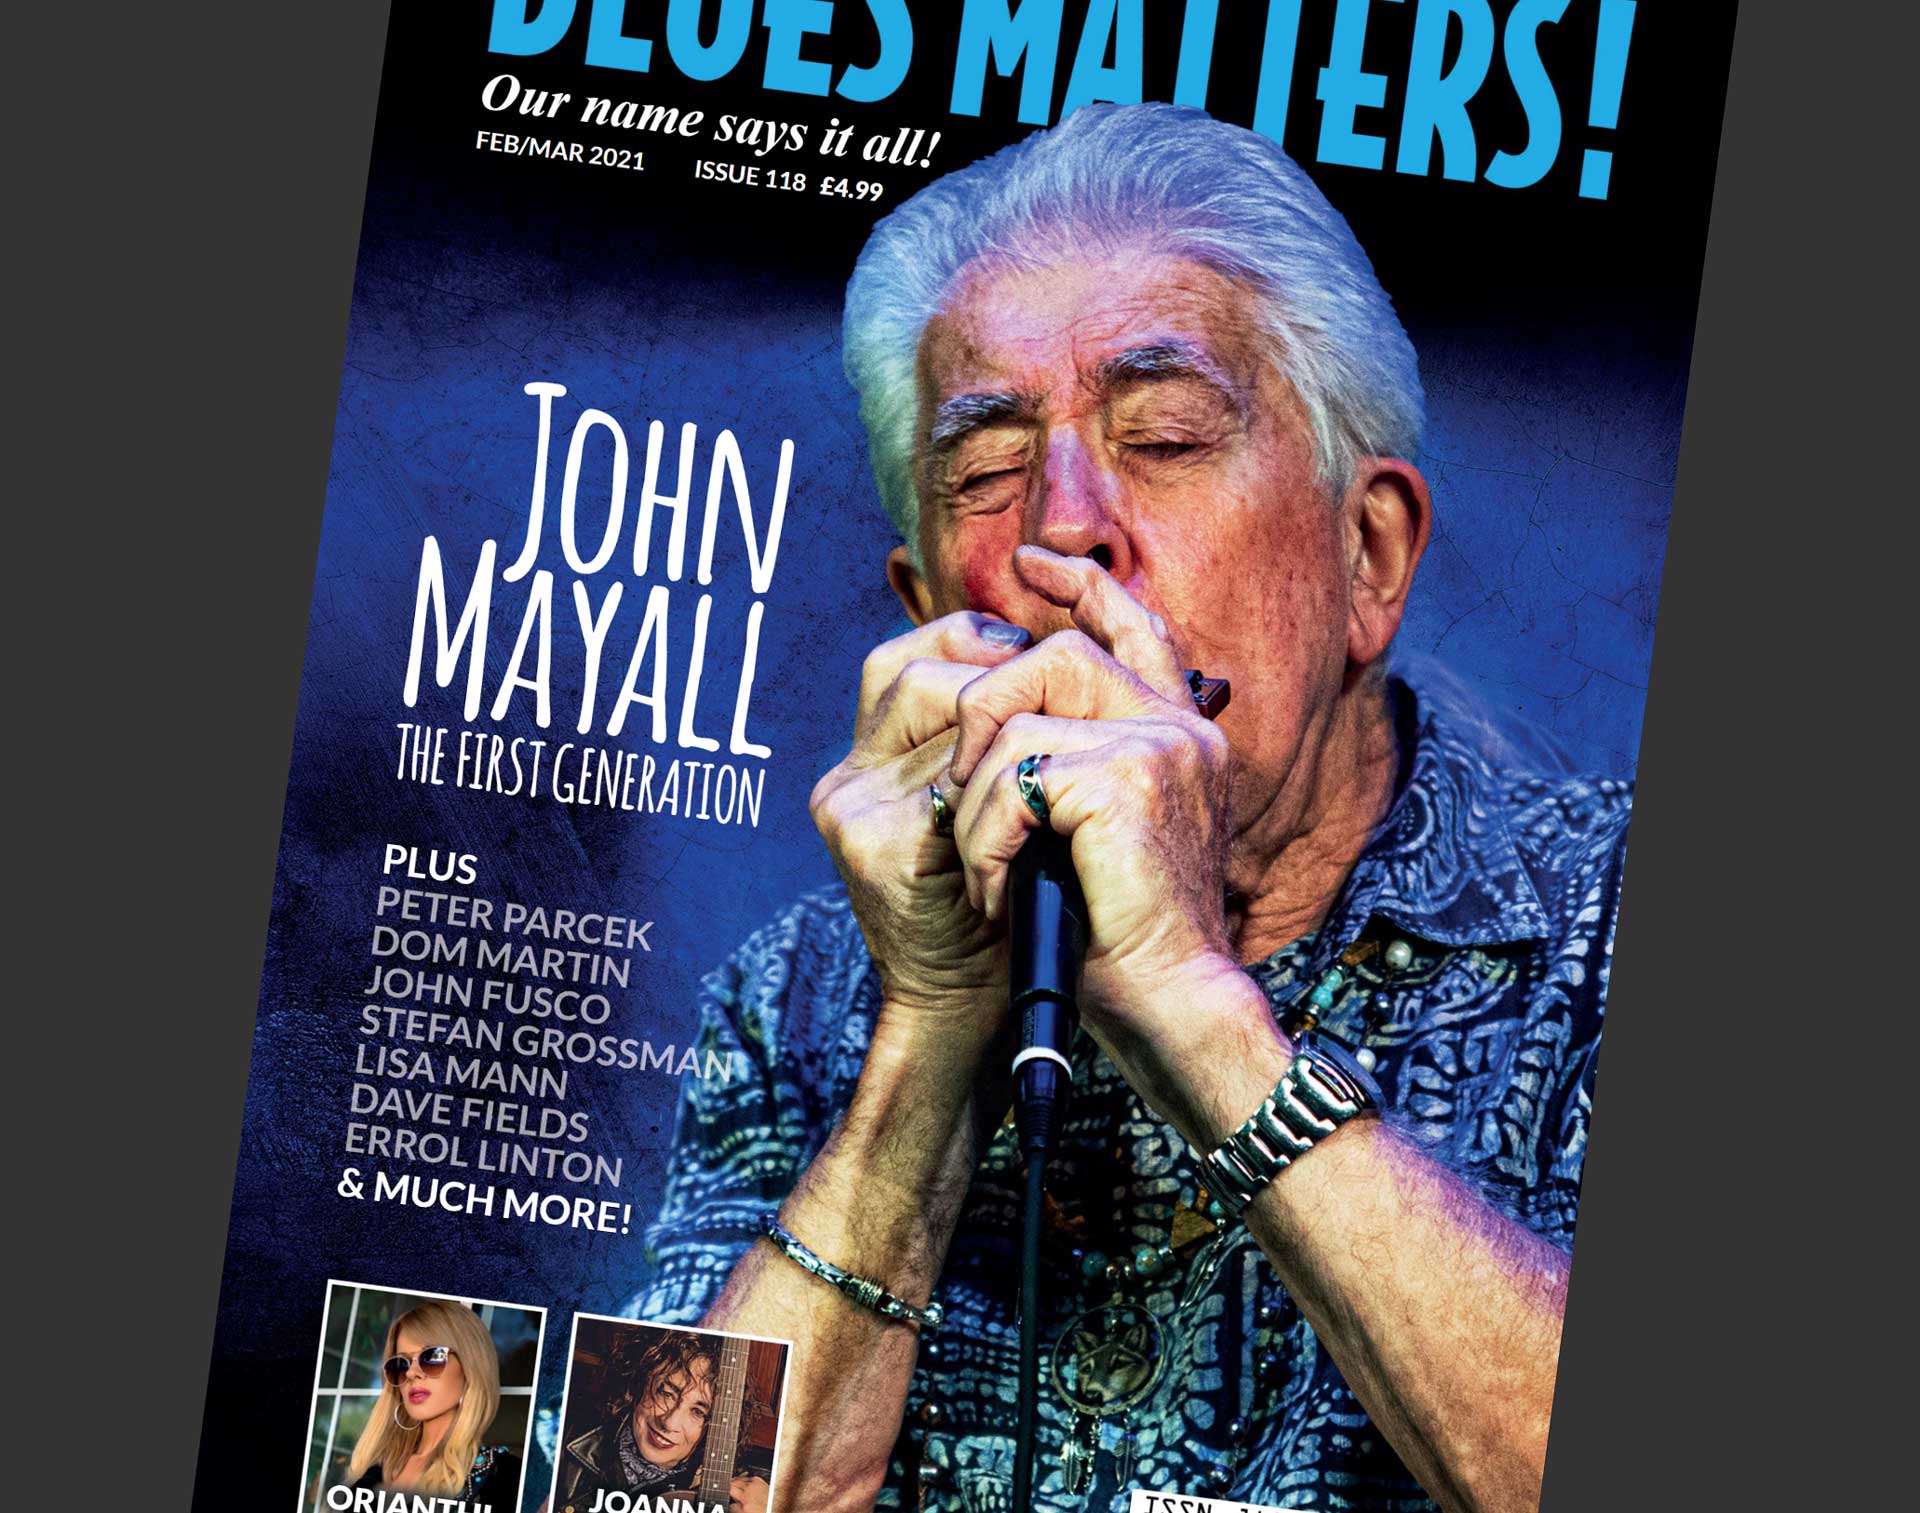 Image of John Mayall on the cover of Blues Matters Magazine